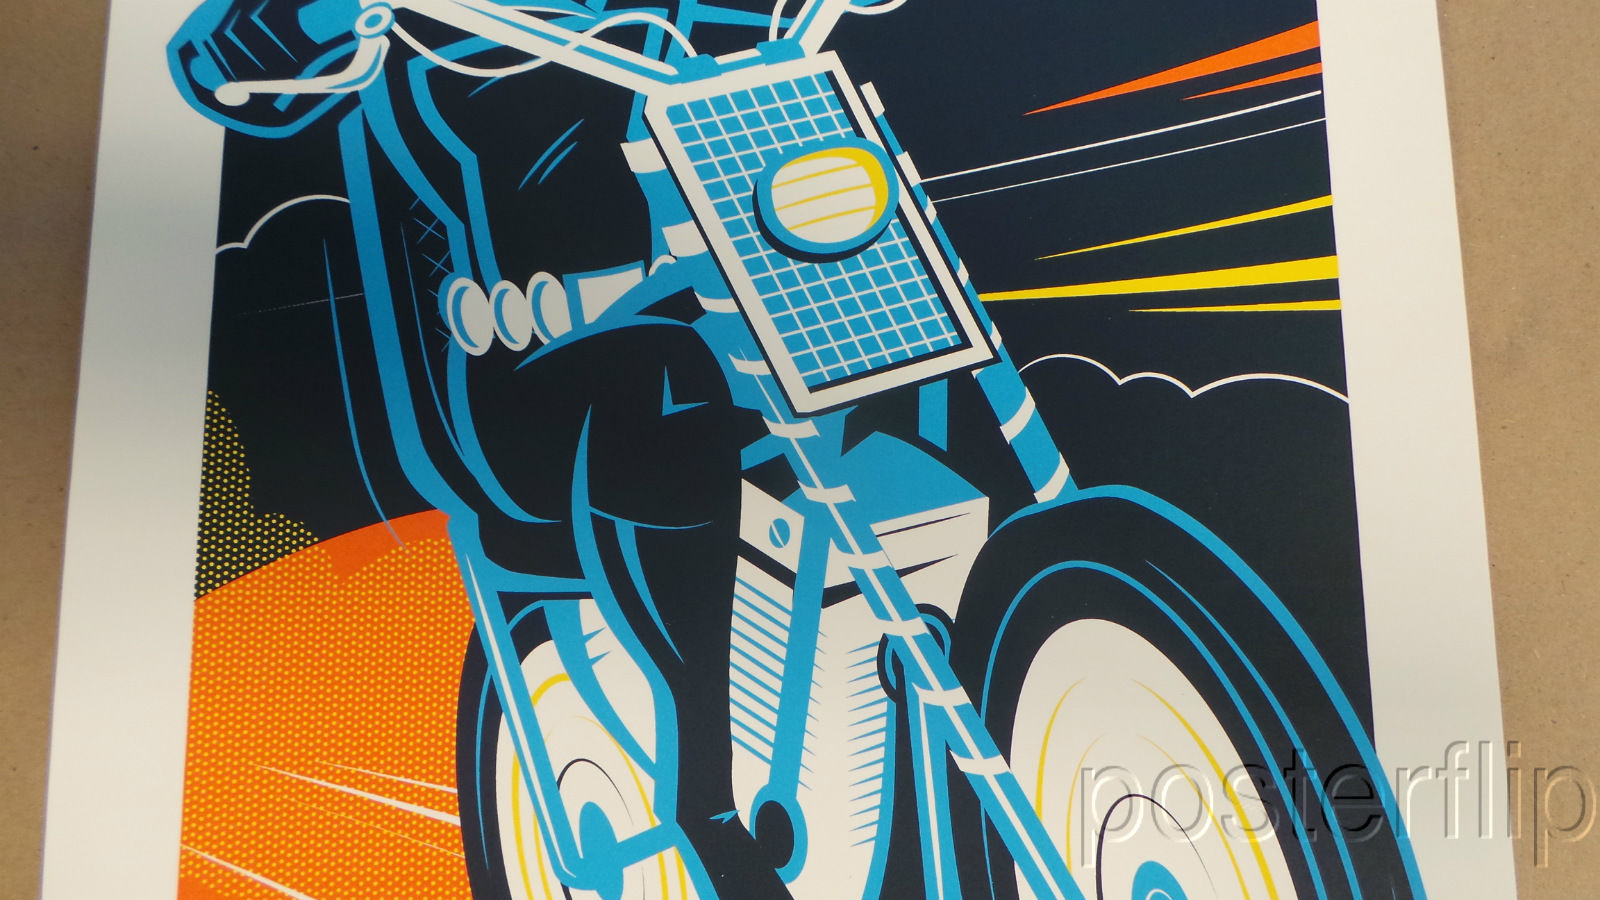 Title:  Ghost Rider  Artist:  Dave Perillo  Edition:  xx/225  Type: Screen print poster  Size:  12" x 24"  Notes:  Released by Grey Matter Art in 2015.  Inspired by the iconic Marvel comic book superhero.  Print is stored flat in very good condition. Following purchase, prints are rolled in archival paper and shipped with bubble wrap in sturdy cardboard tubes.  Check out our other listings for more hard-to-find and out-of-print posters.